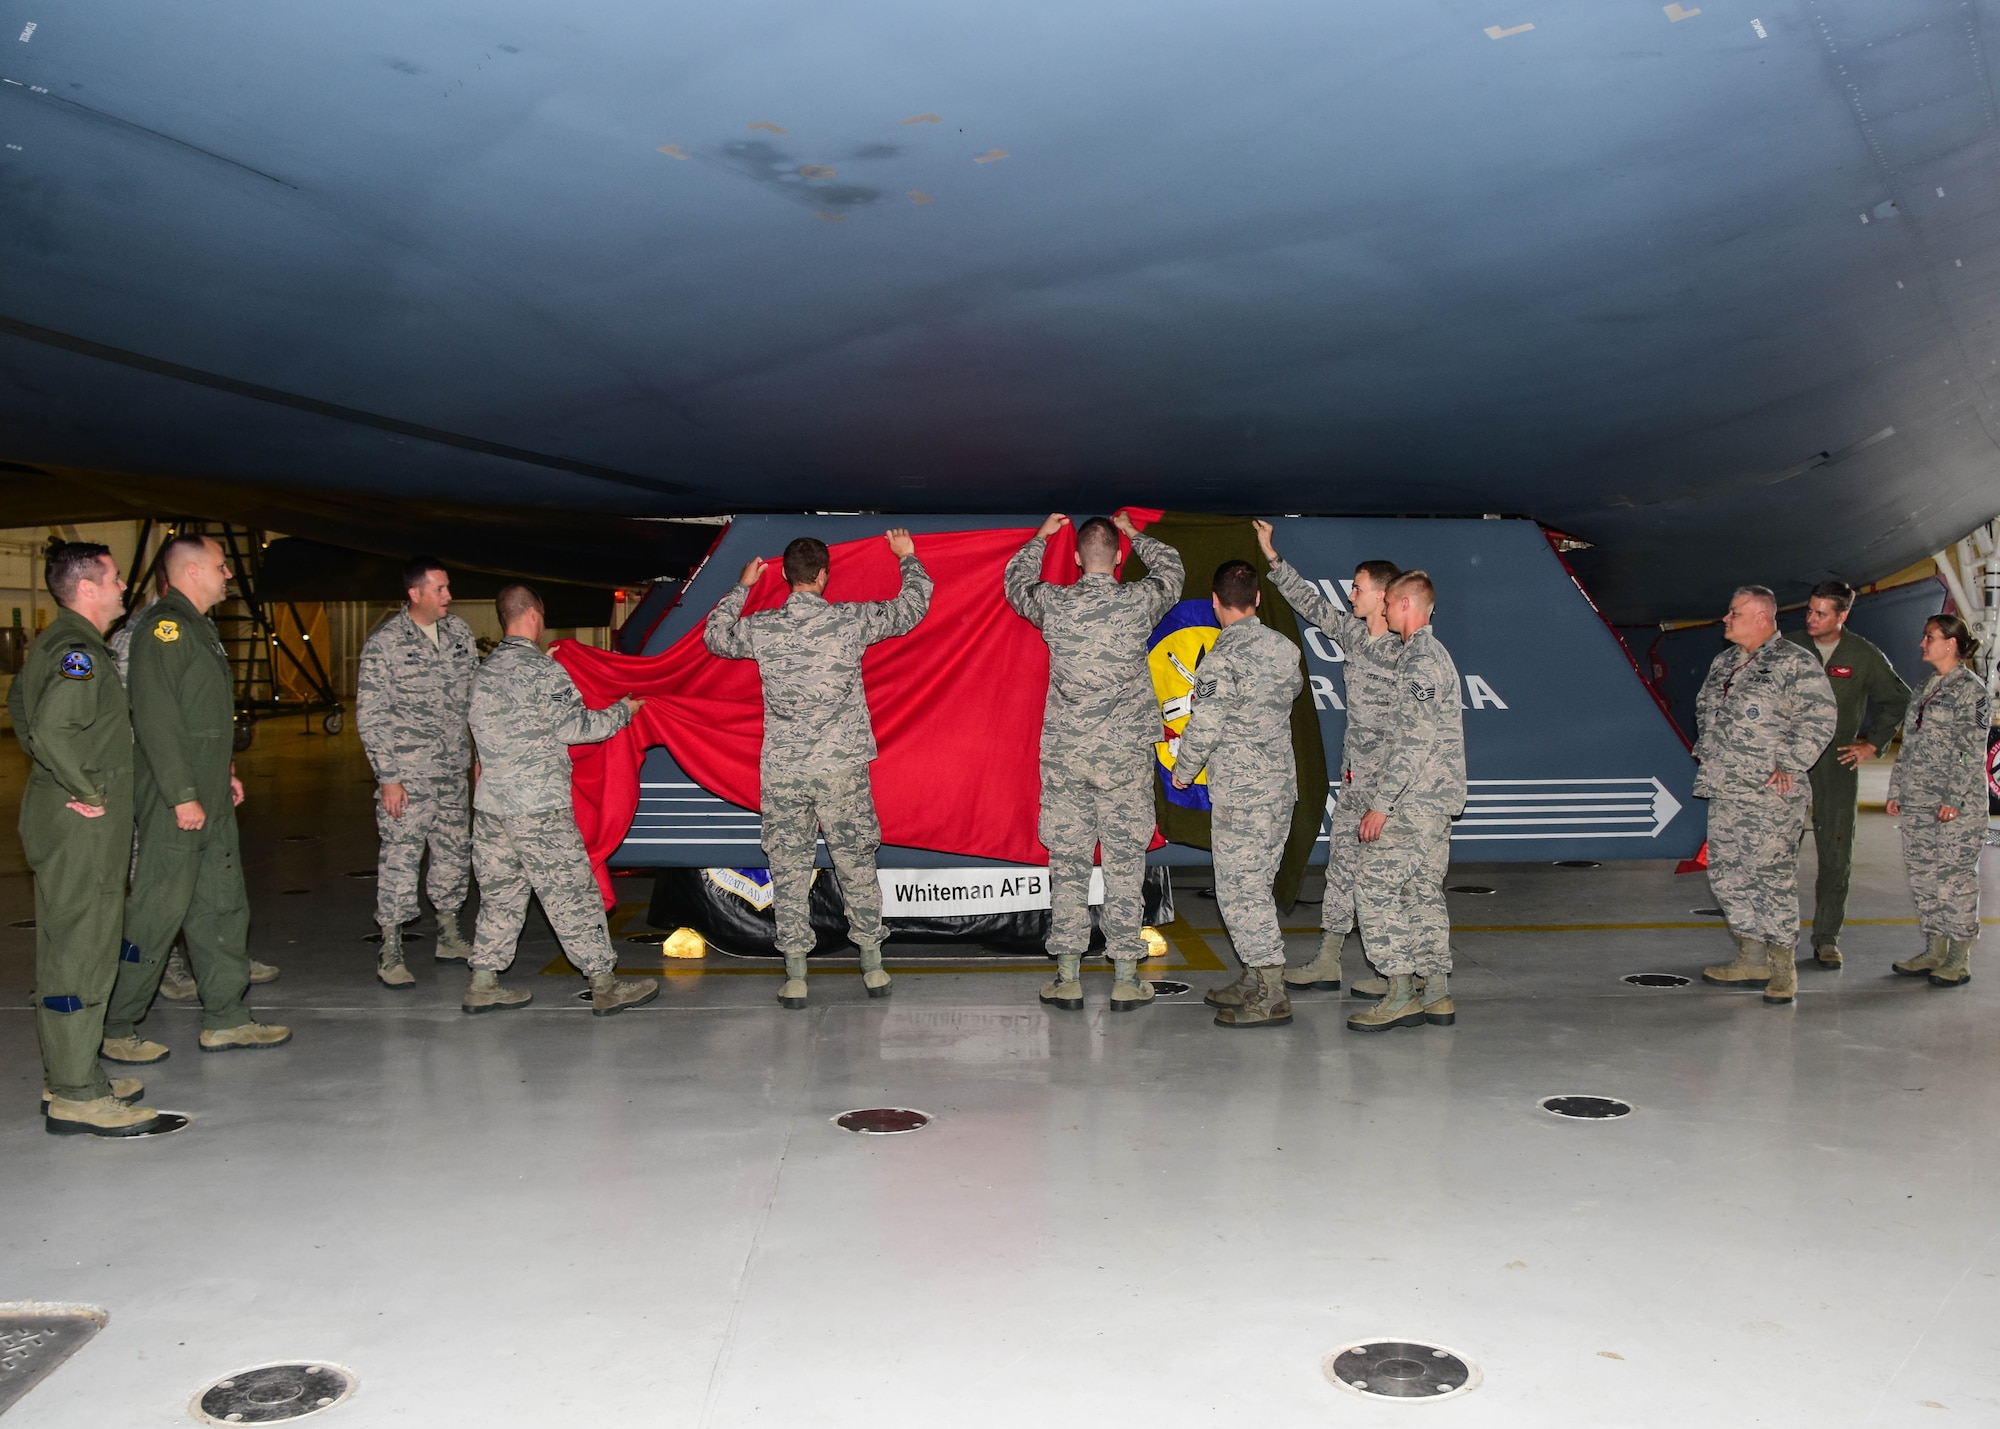 Members of the Missouri Air National Guard’s 131st Bomb Wing and the U.S. Air Force’s 509th Bomb Wing unveil a new paint scheme with the slogan “Lindbergh’s Own” on a gear door for the Spirit of Nebraska, a B-2 bomber, at Whiteman Air Force Base, Missouri, Aug. 4, 2018. The slogan is associated with the 110th Bomb Squadron, a subordinate unit of the 131st BW, and is tied to the late Charles A. Lindbergh, the unit’s most famous member. (U.S. Air National Guard photo by Senior Master Sgt. Mary Dale Amison)